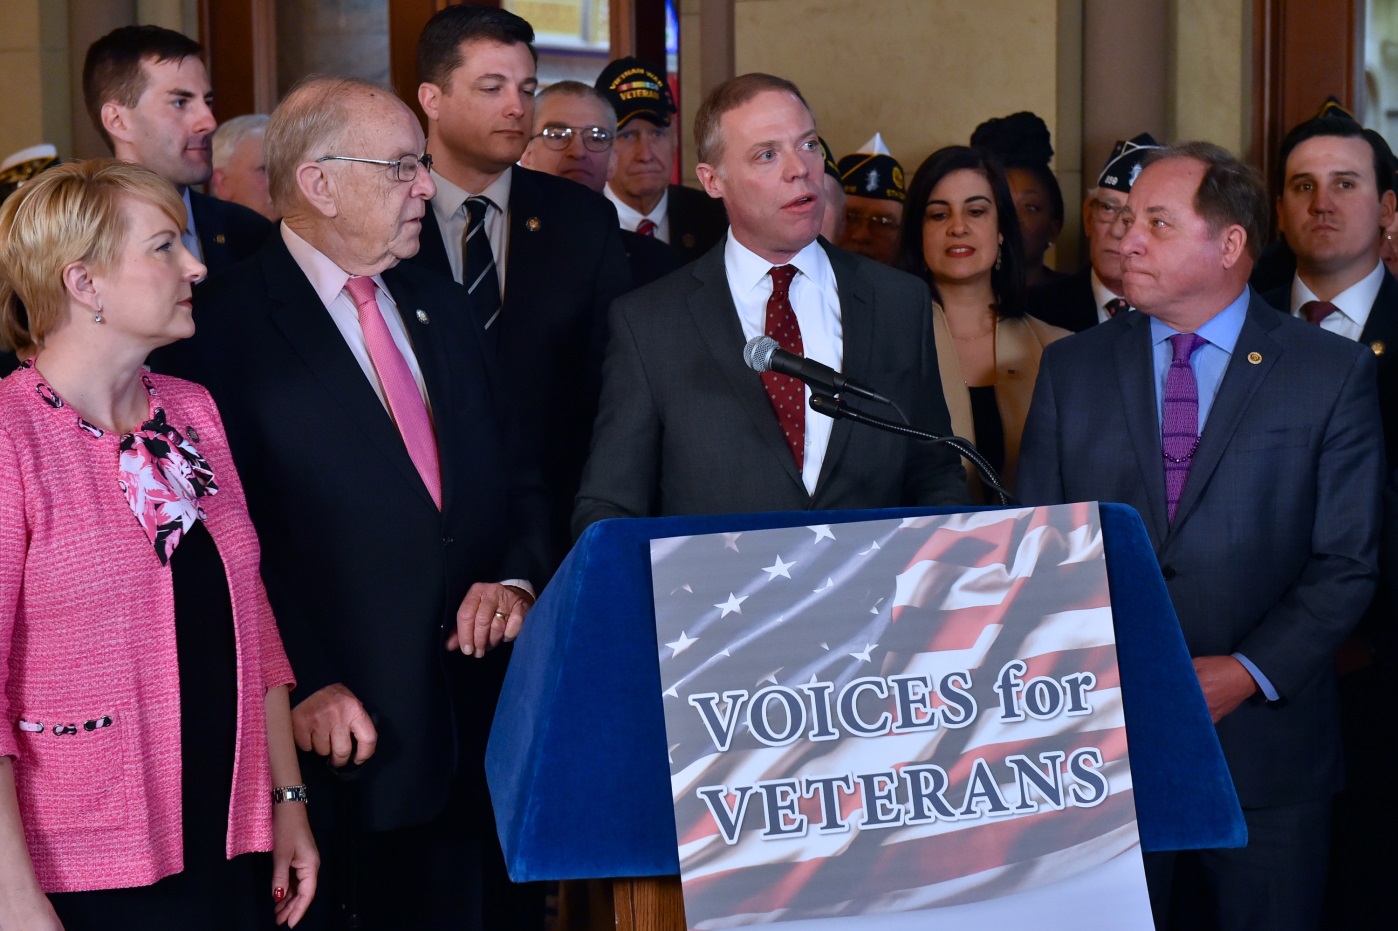 Assemblywoman Mary Beth Walsh (R,C,I-Ballston Spa) pictured with Assembly Minority Leader Will Barclay (R,C,I,Ref-Pulaski) and members of the Assembly Minority Conference at a “Voices for Veterans” press conference in Albany on February 25, 2020